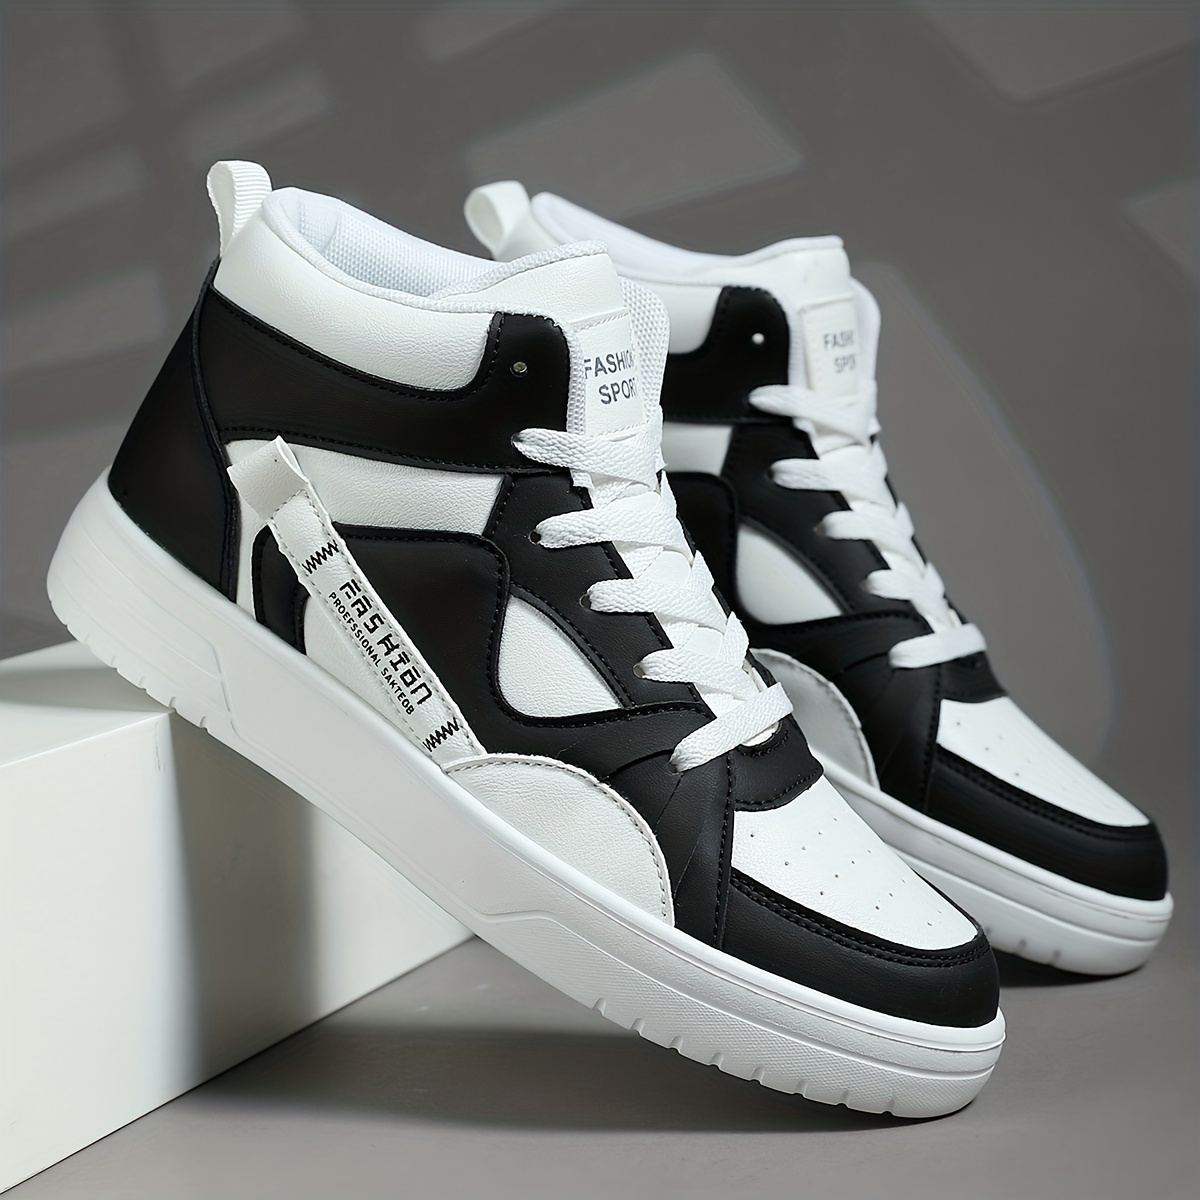 Men's High Top Skate Shoes With Good Grip, Breathable Lace-up Sneakers,  Men's Footwear